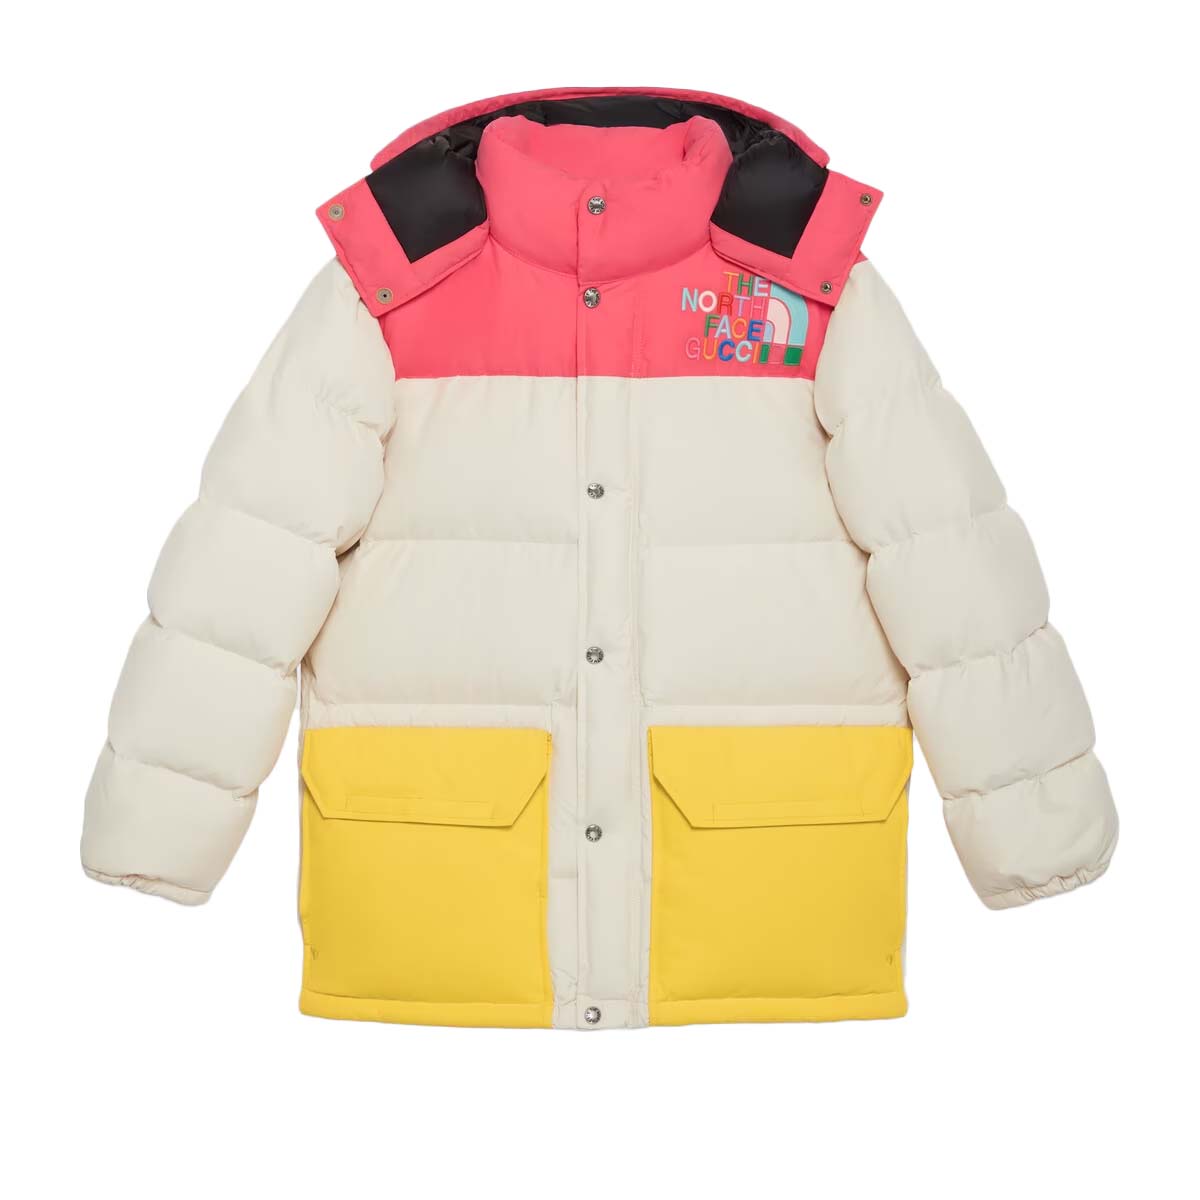 Gucci x The North Face Down Jacket Ivory/Dark Pink/Yellow - FW22 - US